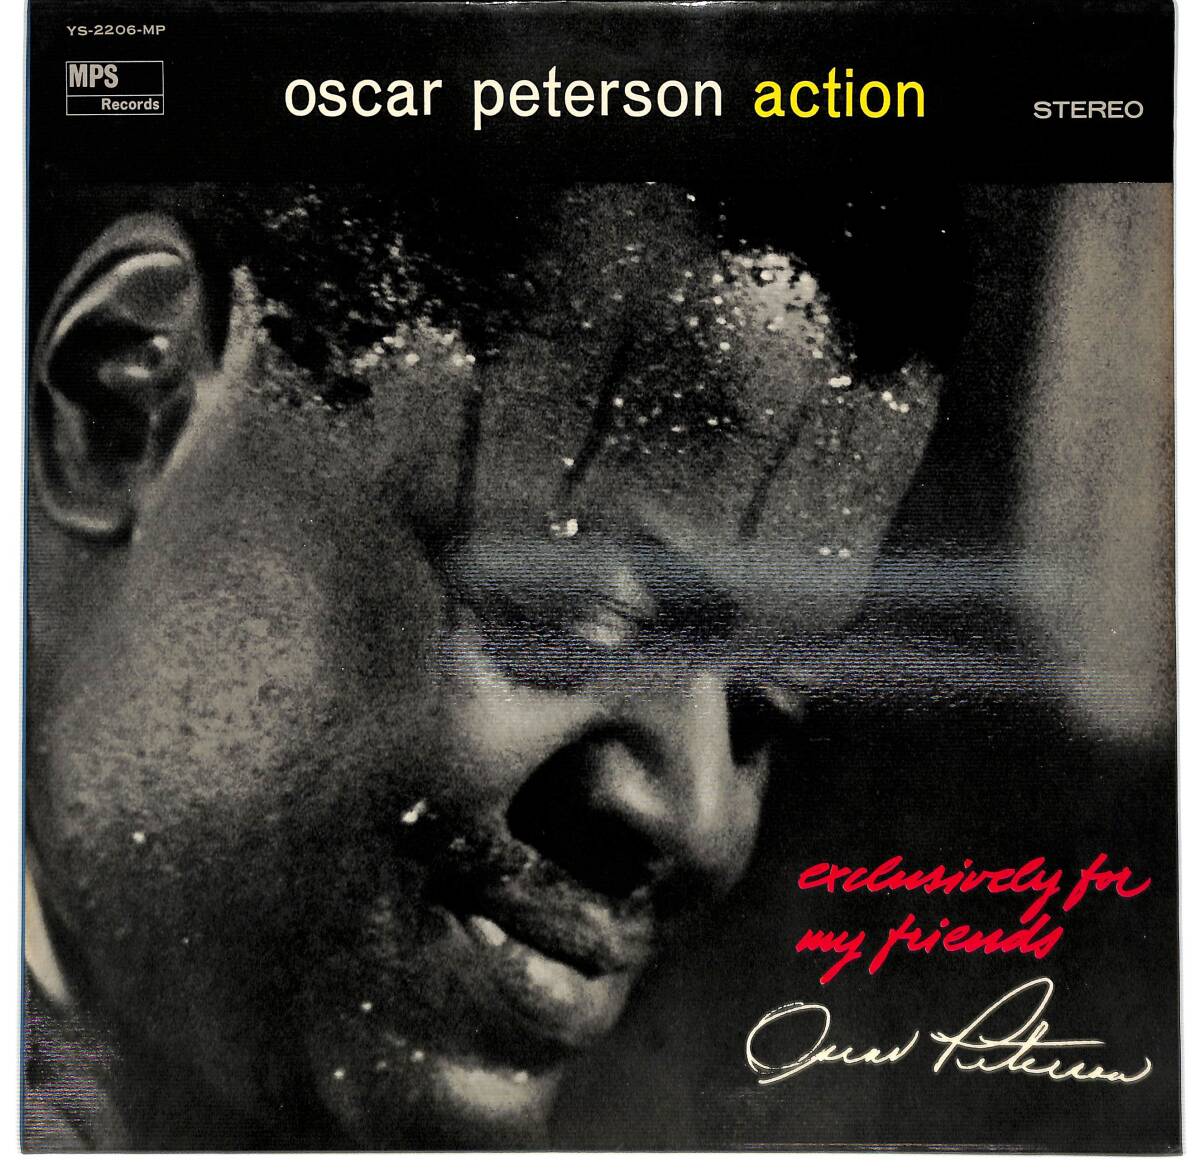 e3531/LP/Oscar Peterson/Action/Exclusively For My Friendsの画像1